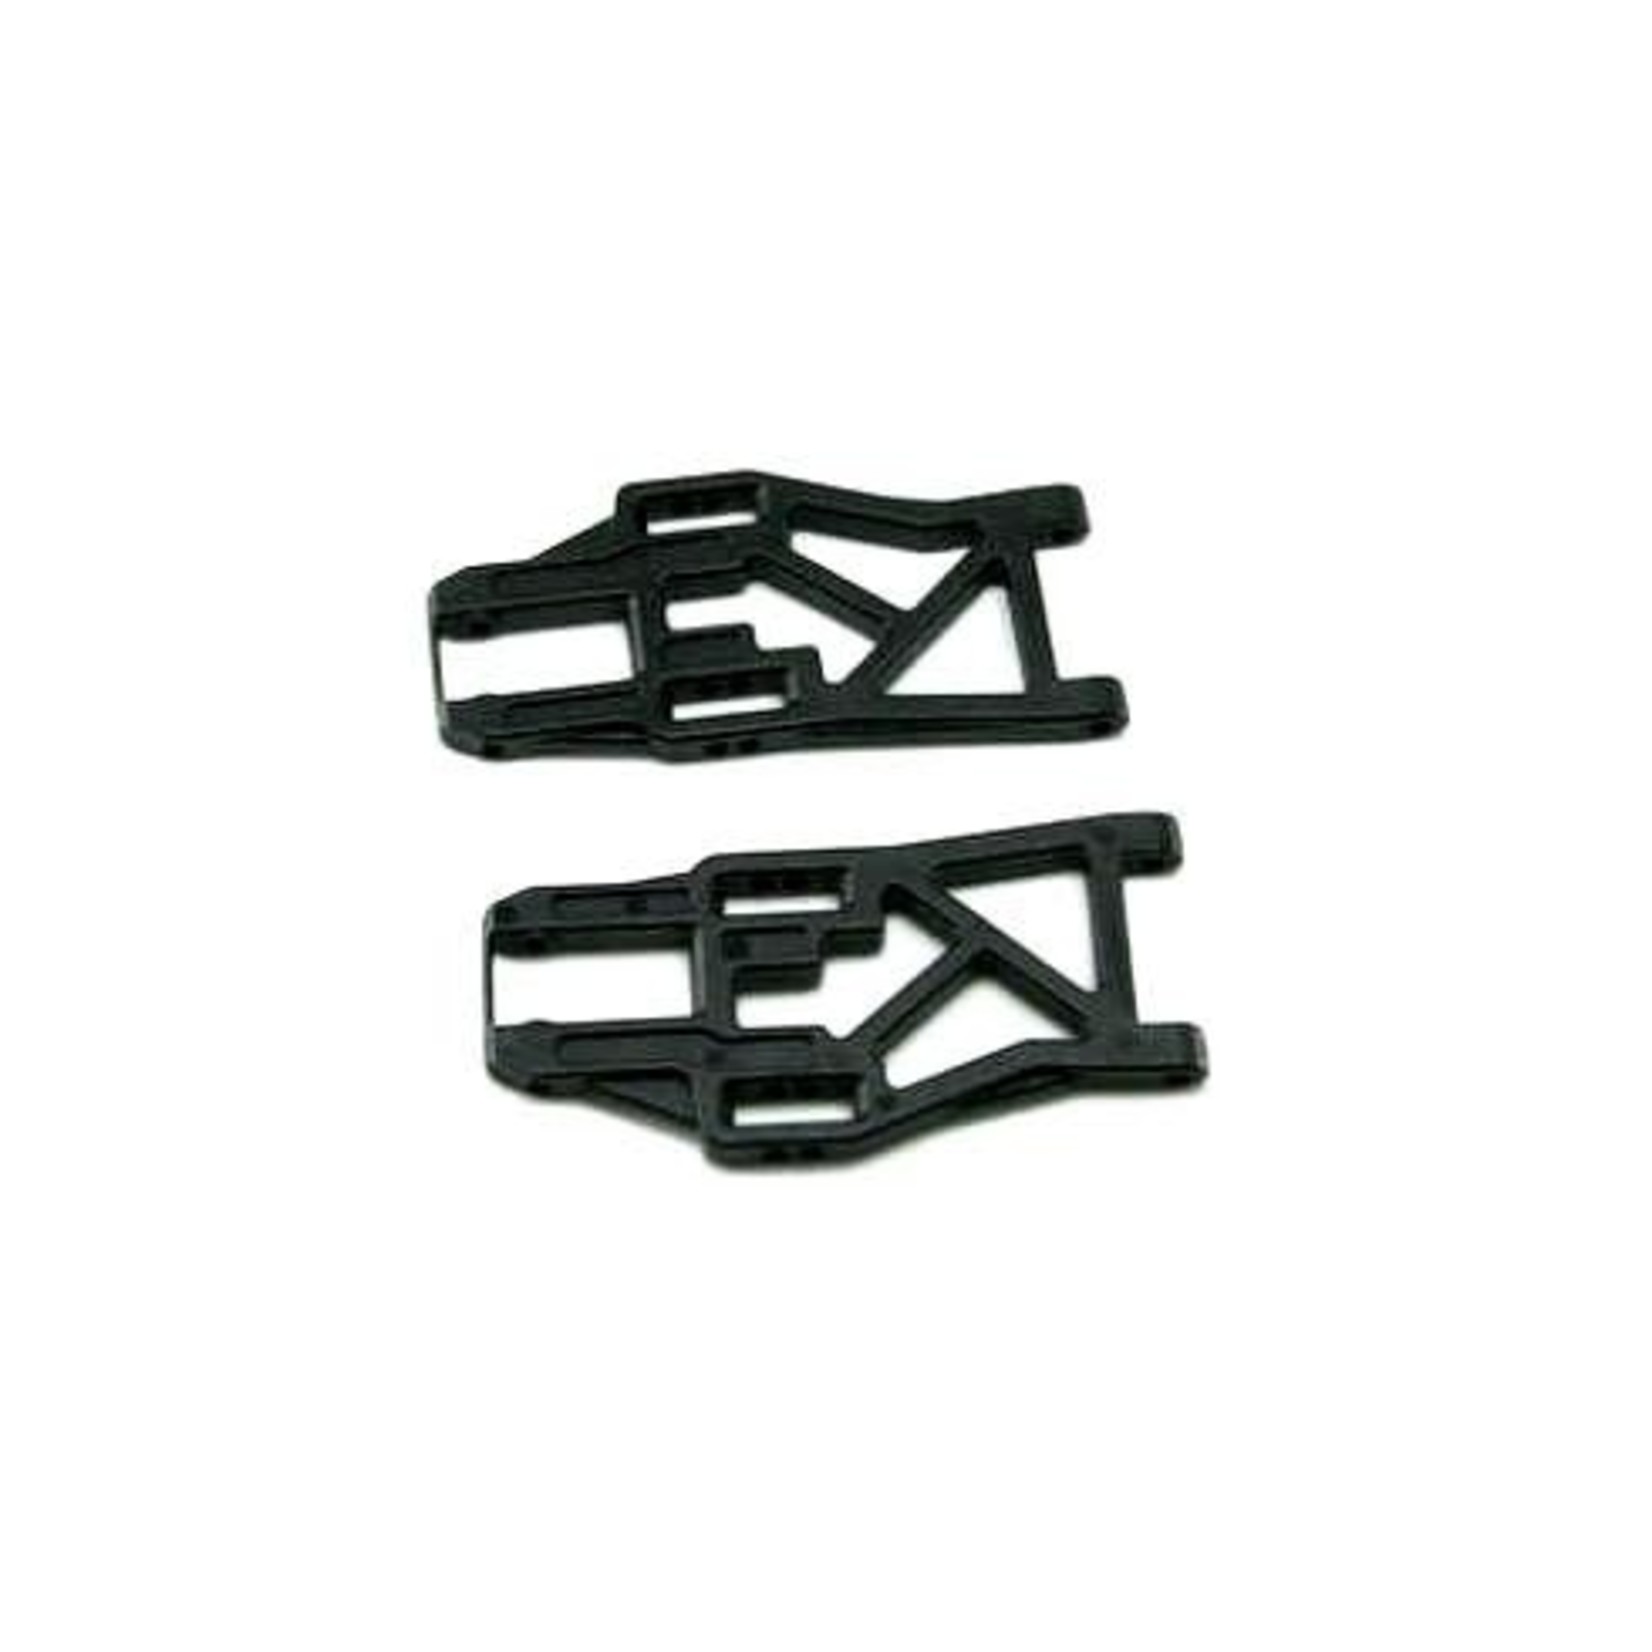 Redcat Racing RedCat Racing Front Lower Suspension Arms L/R (1pr) #08005